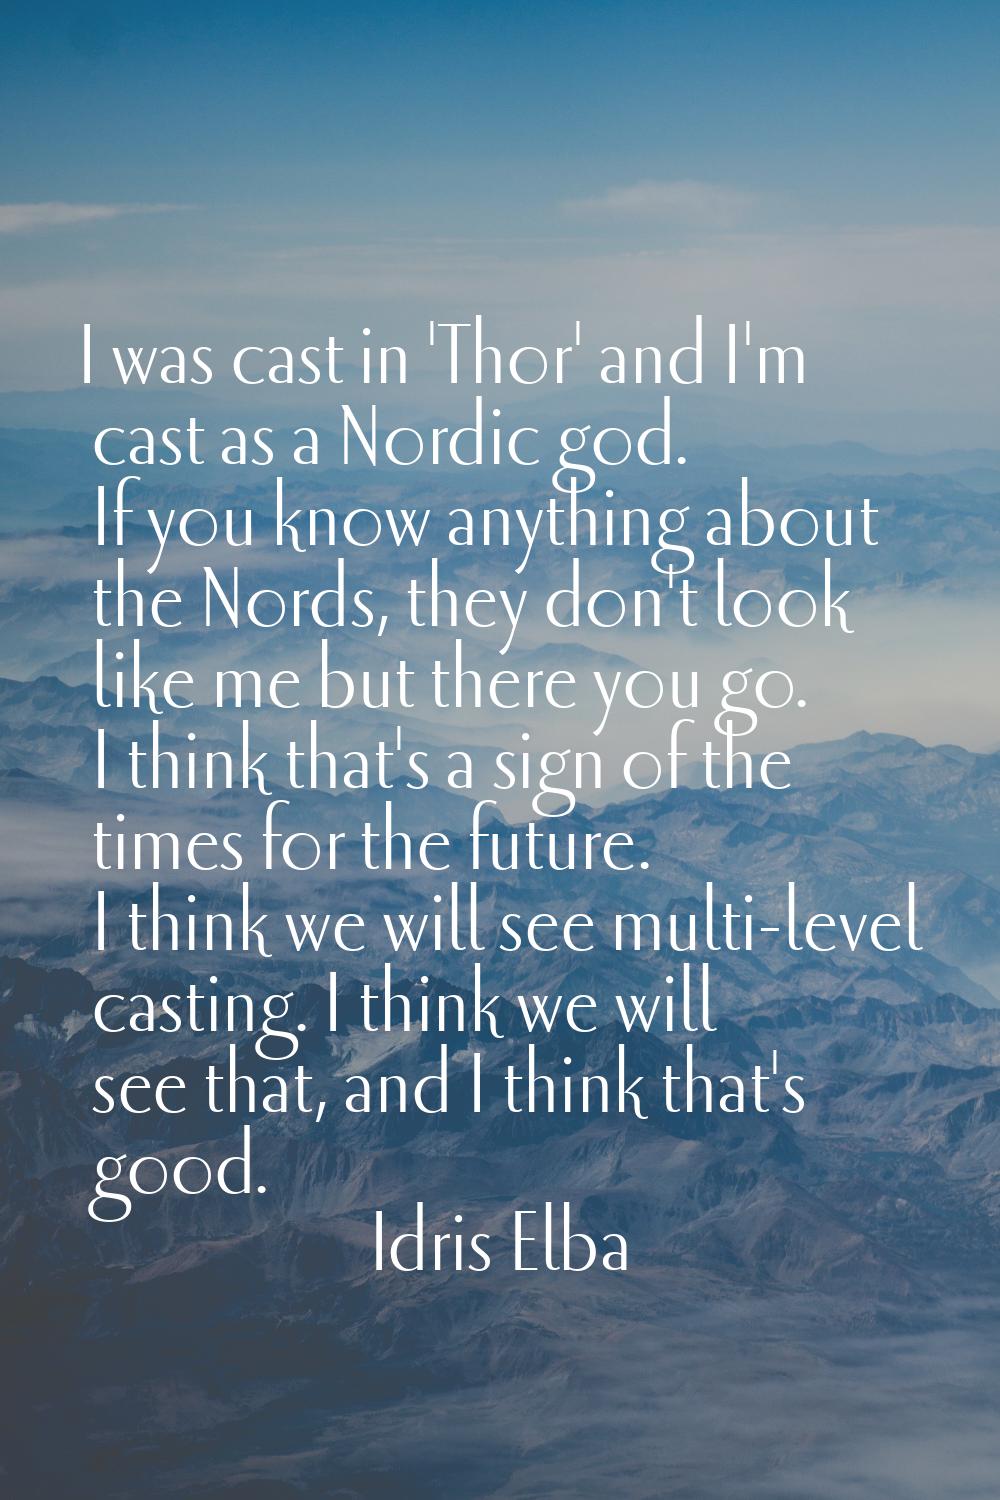 I was cast in 'Thor' and I'm cast as a Nordic god. If you know anything about the Nords, they don't